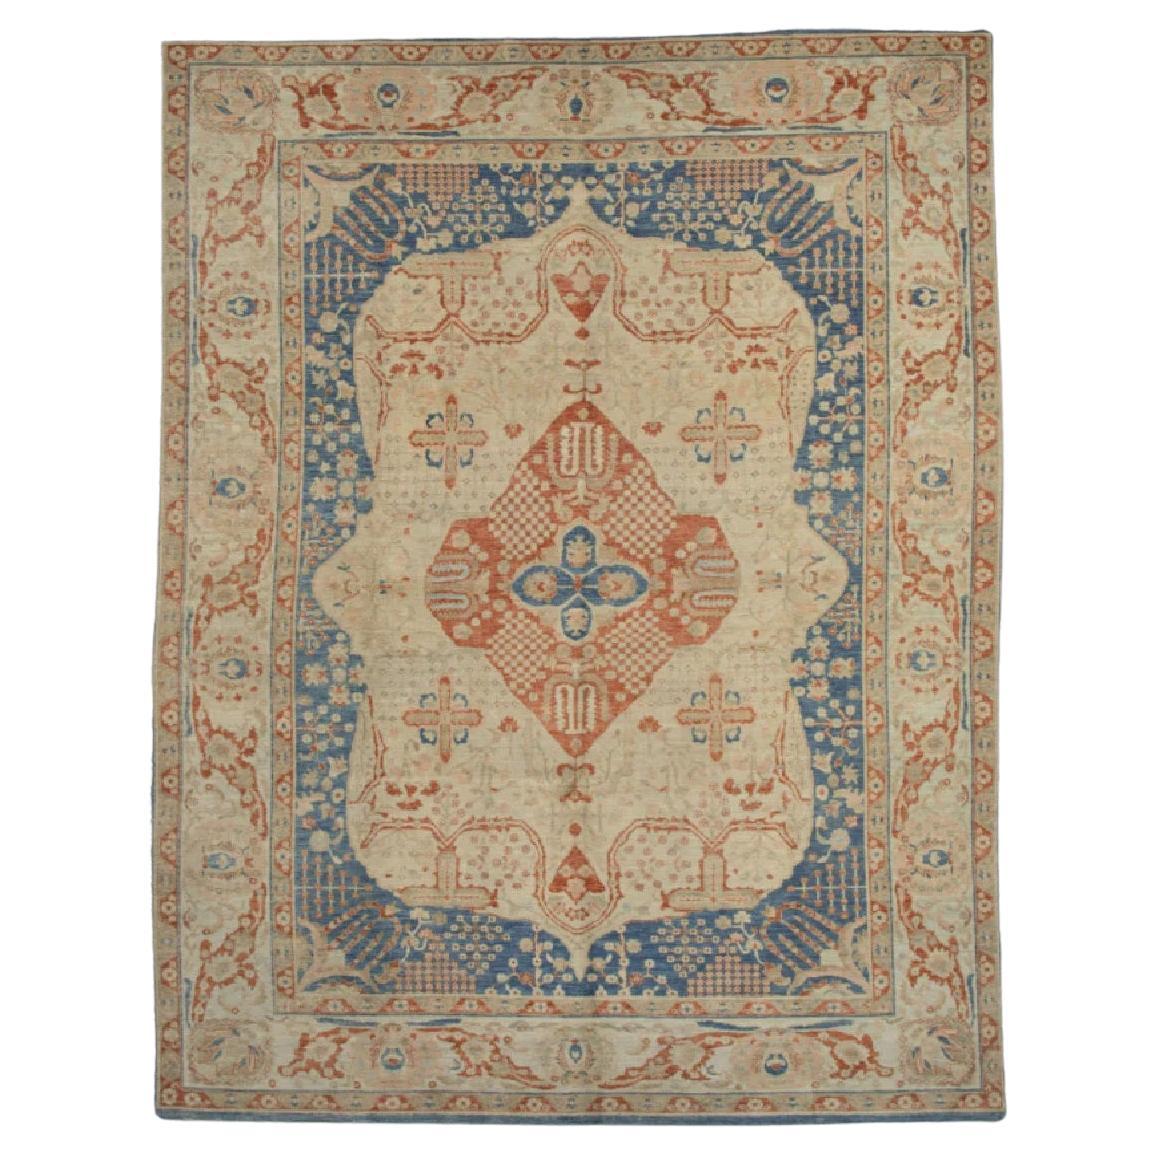 Red & Blue Turkish Finewoven Wool Oushak Rug 9'10" x 13'8" For Sale